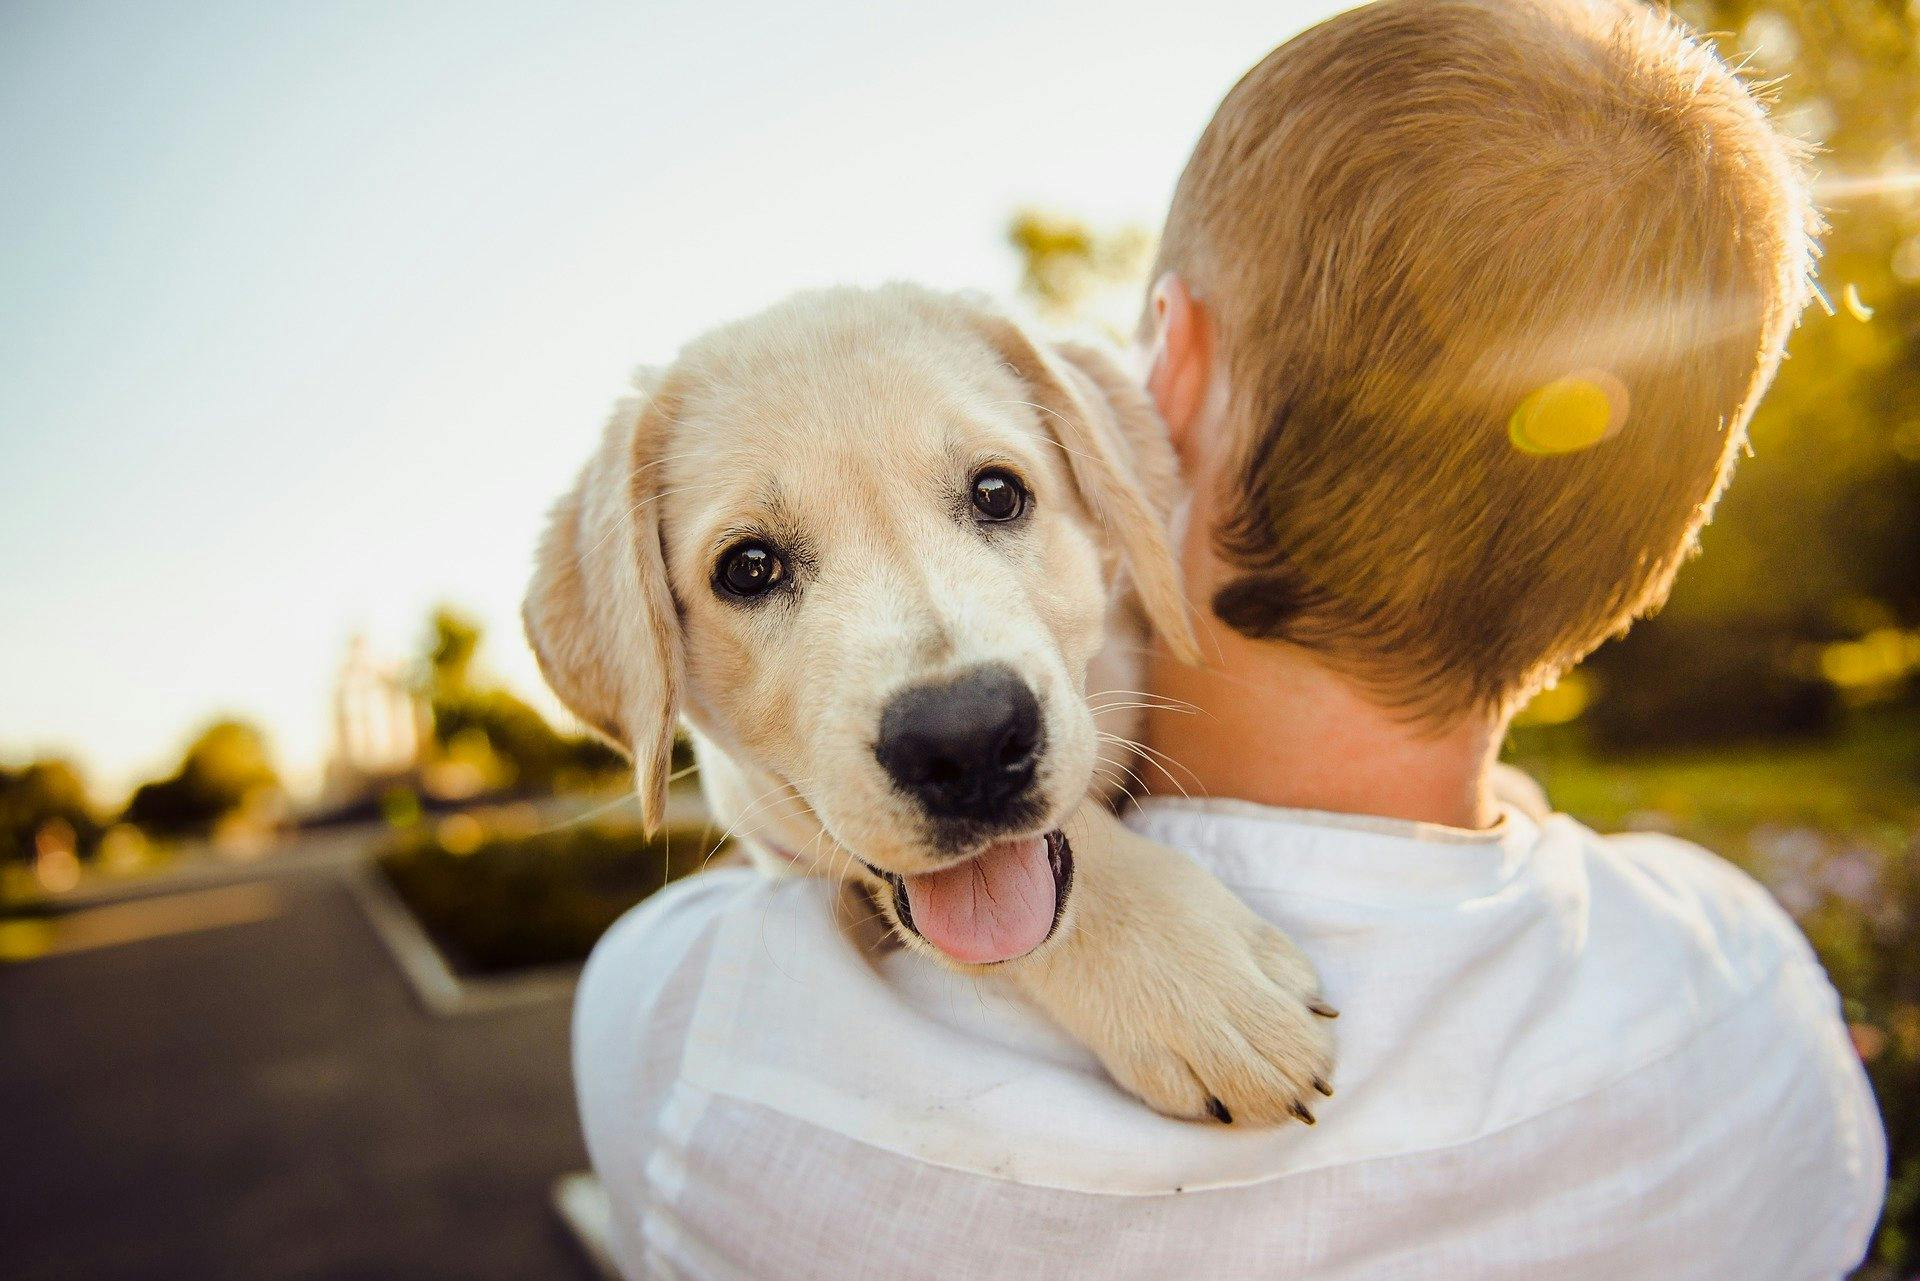 The “New Puppy Owner” Checklist